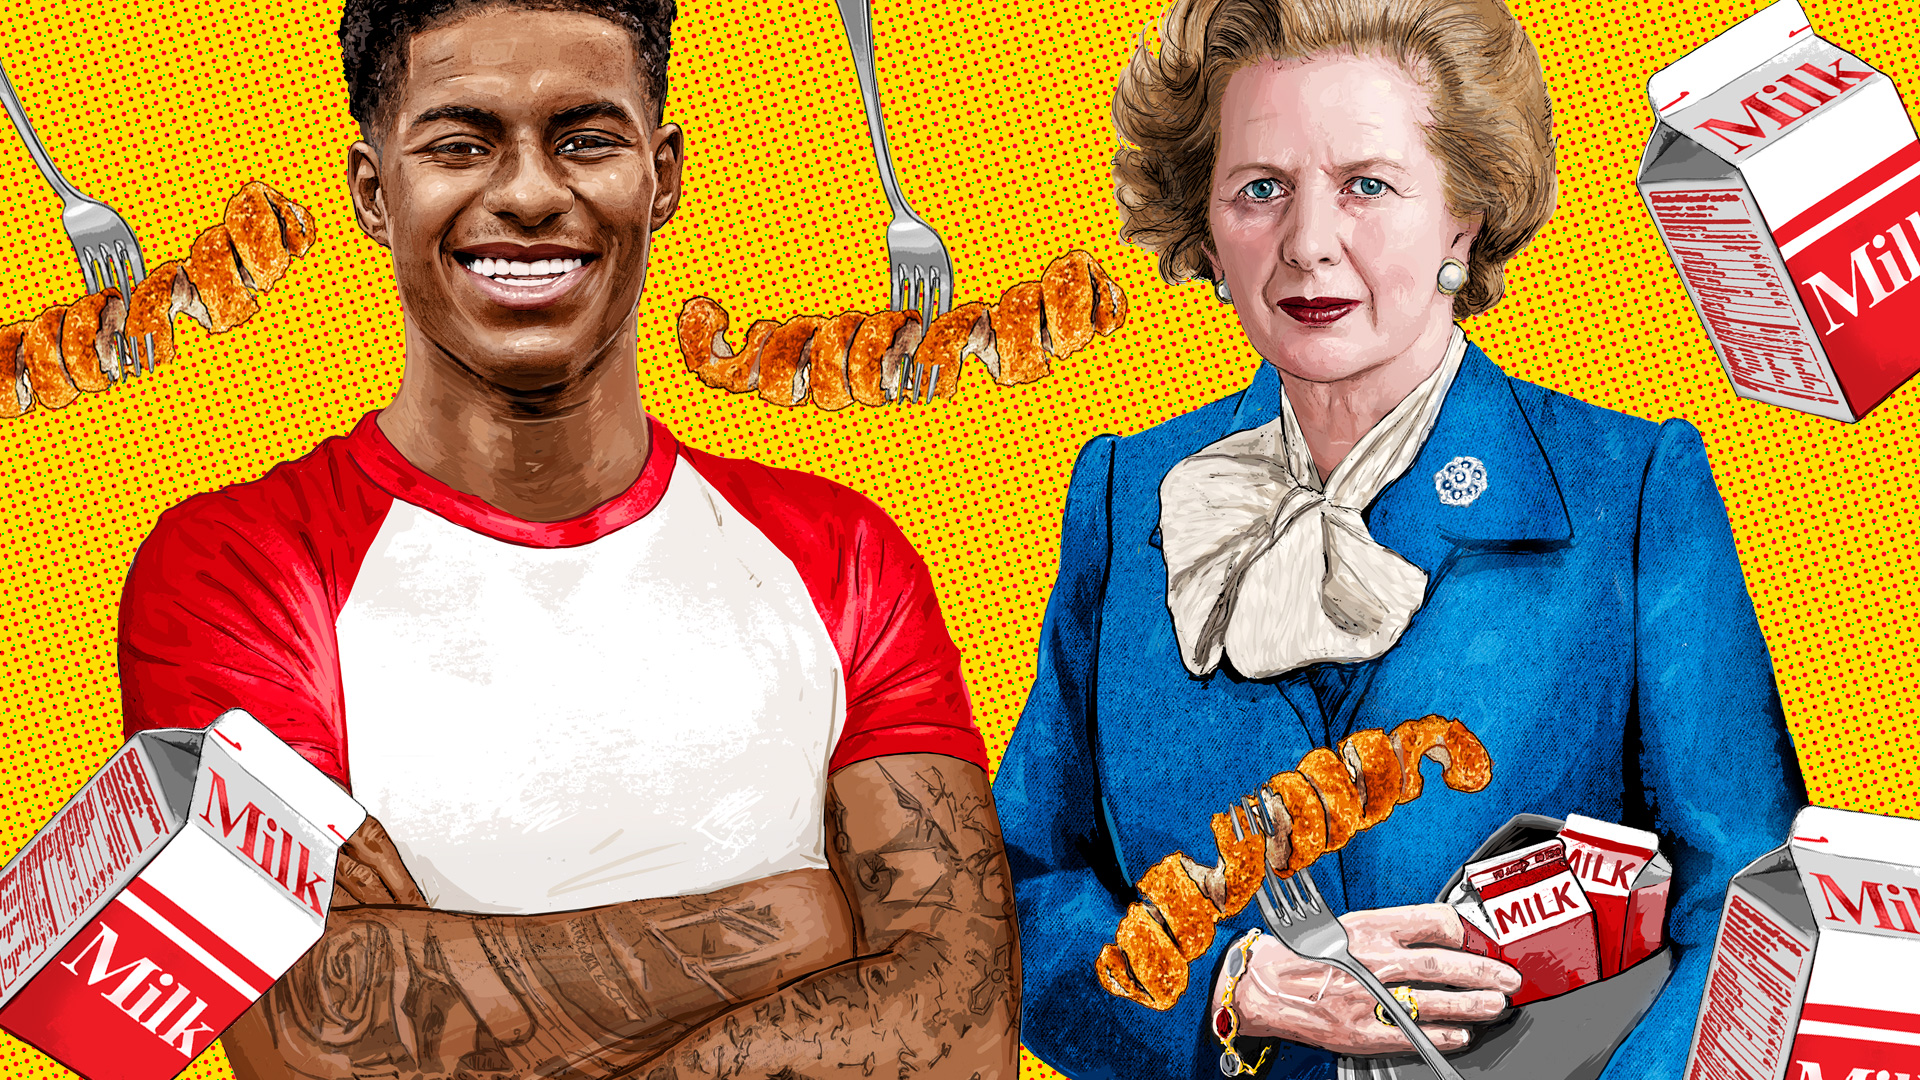 Marcus Rashford launched the Child Food Poverty Task Force to overhaul the free school meals system, including to expand them to every household on universal credit. Illustration: Matthew Brazier